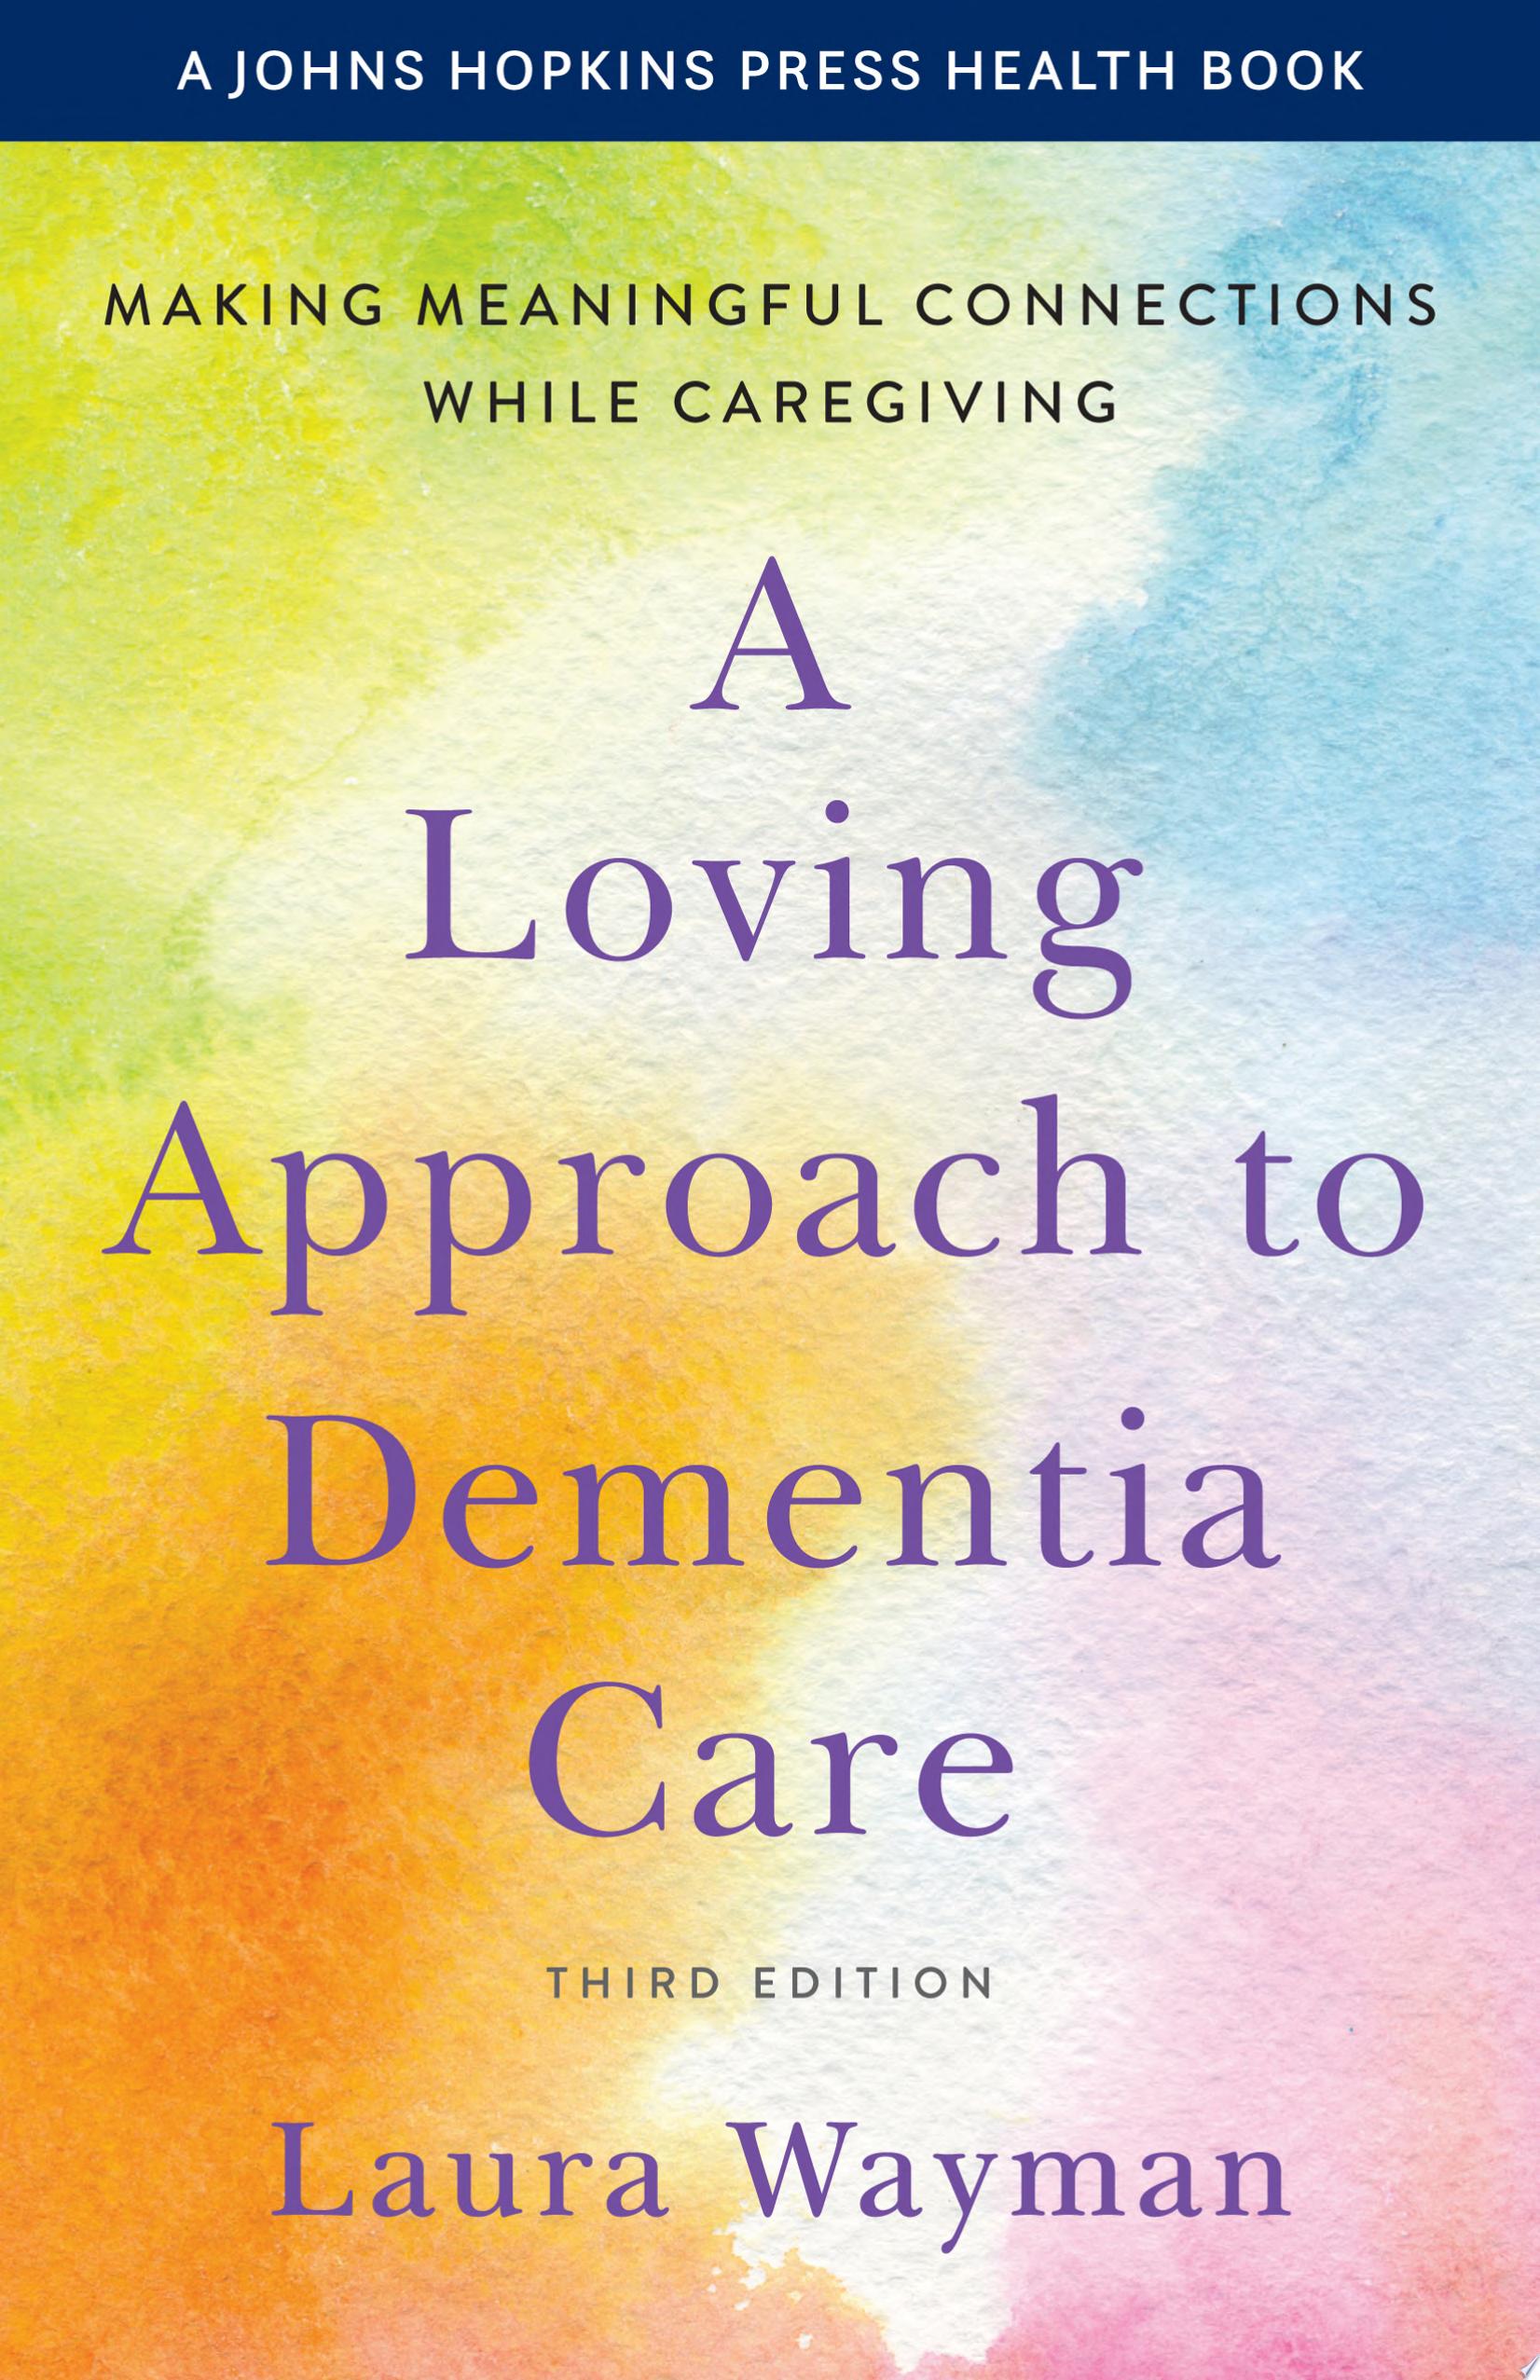 Image for "A Loving Approach to Dementia Care"